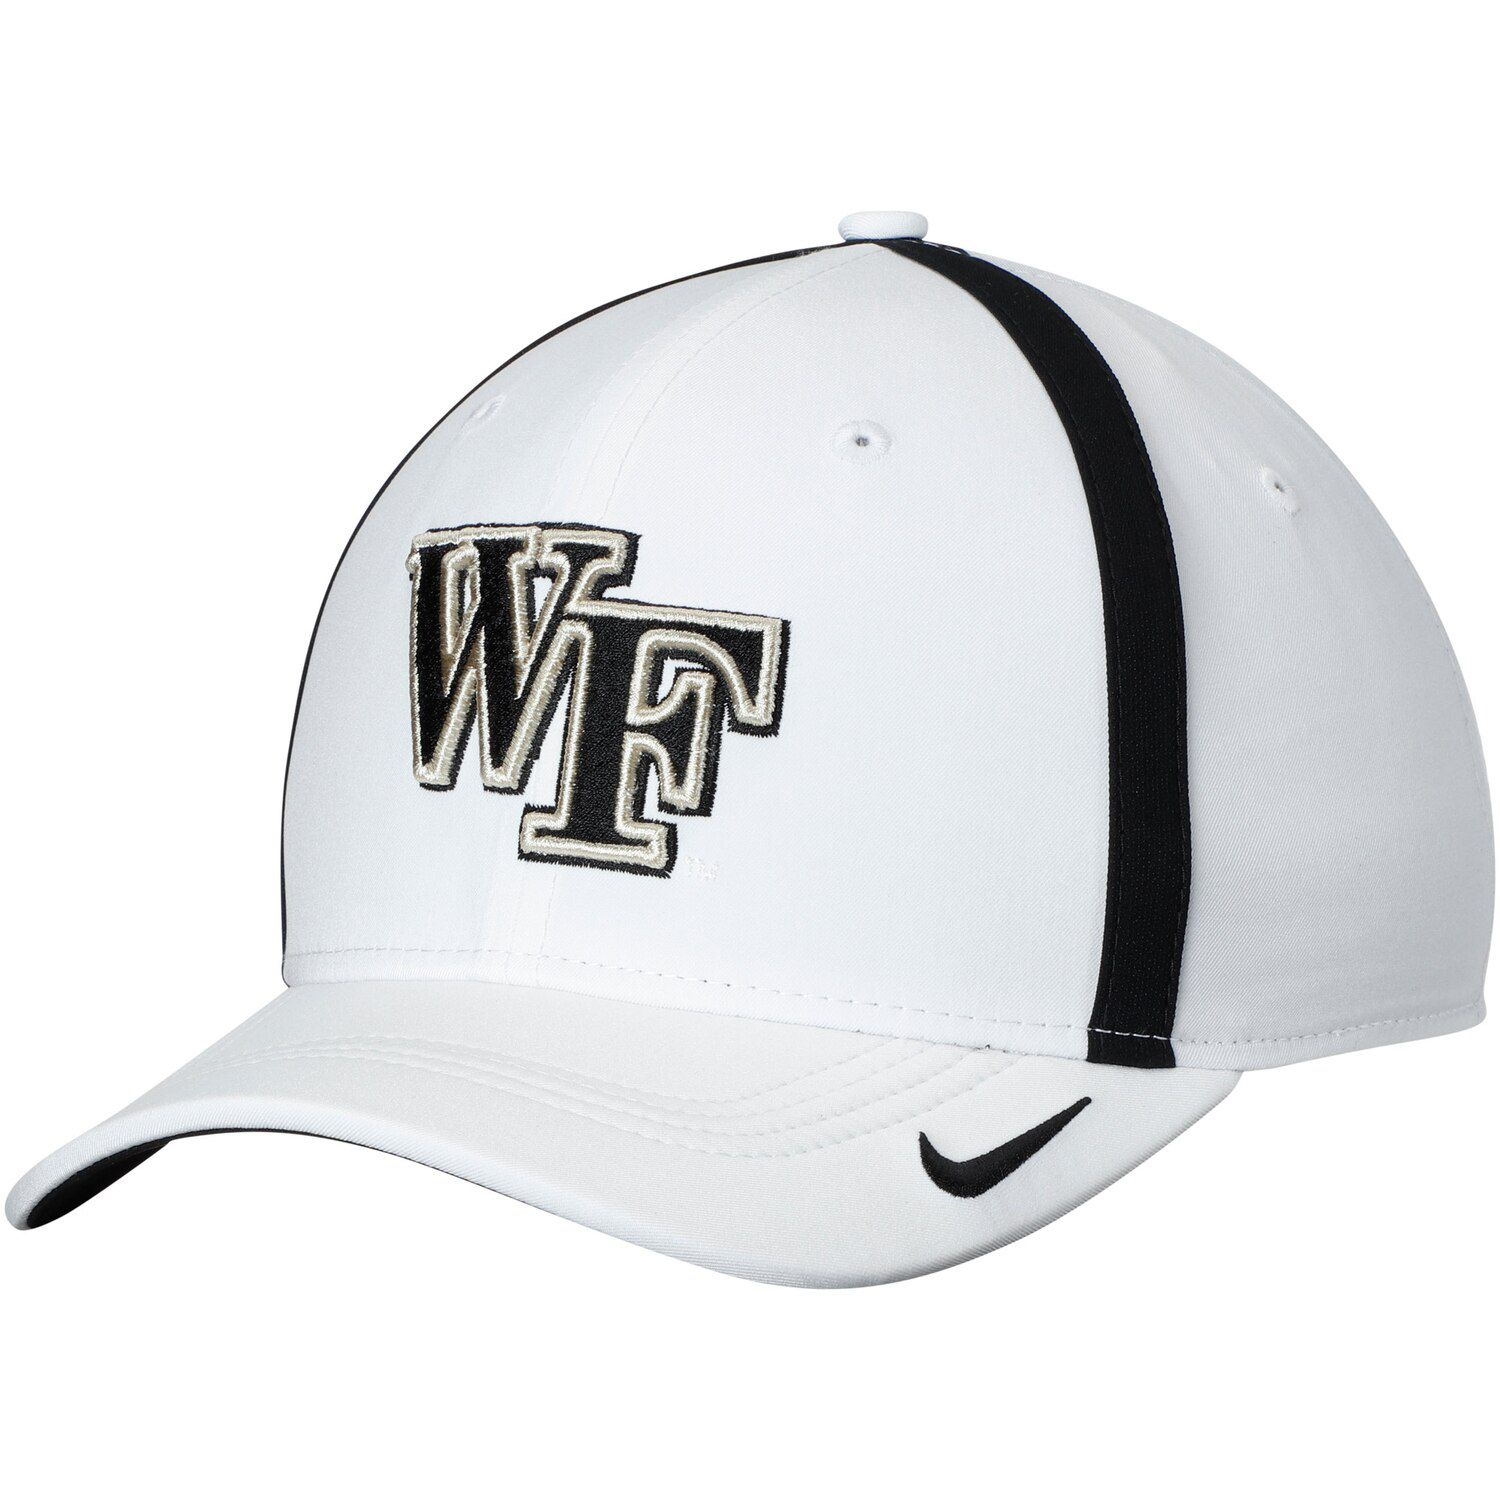 wake forest nike hat